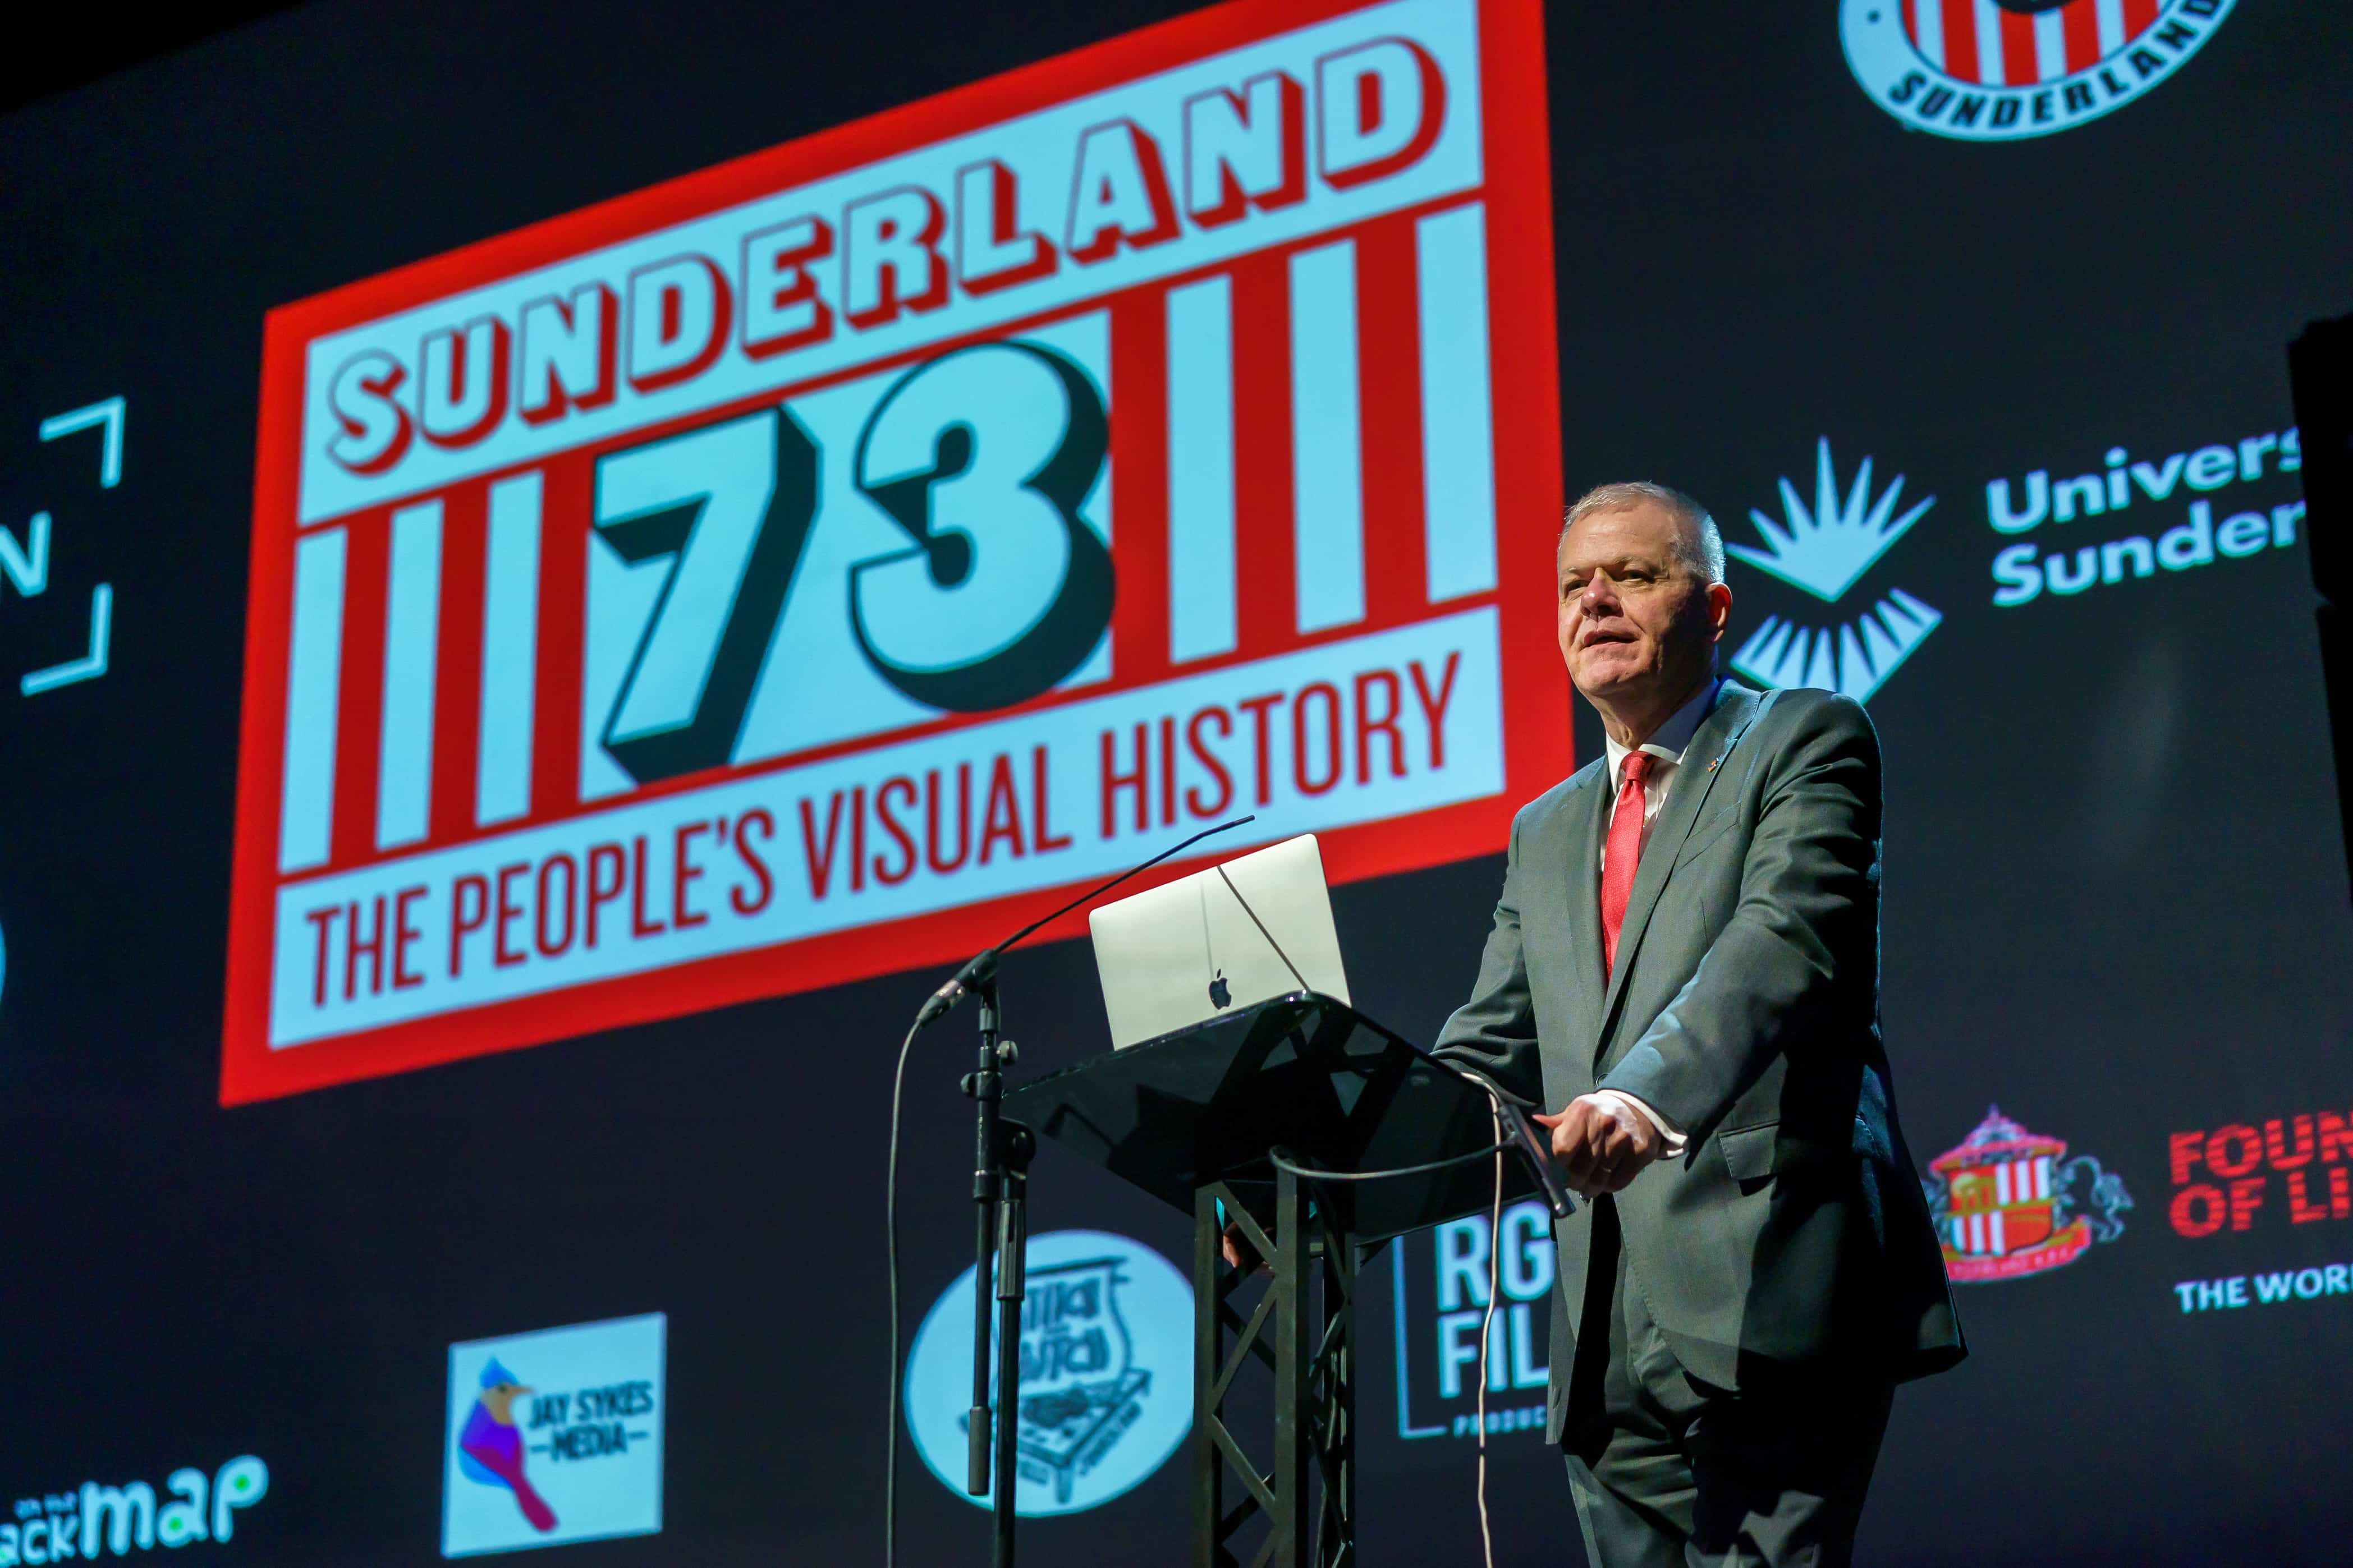 Sir David Bell speaking at a podium at the Sunderland 73 The People’s Visual History book launch event